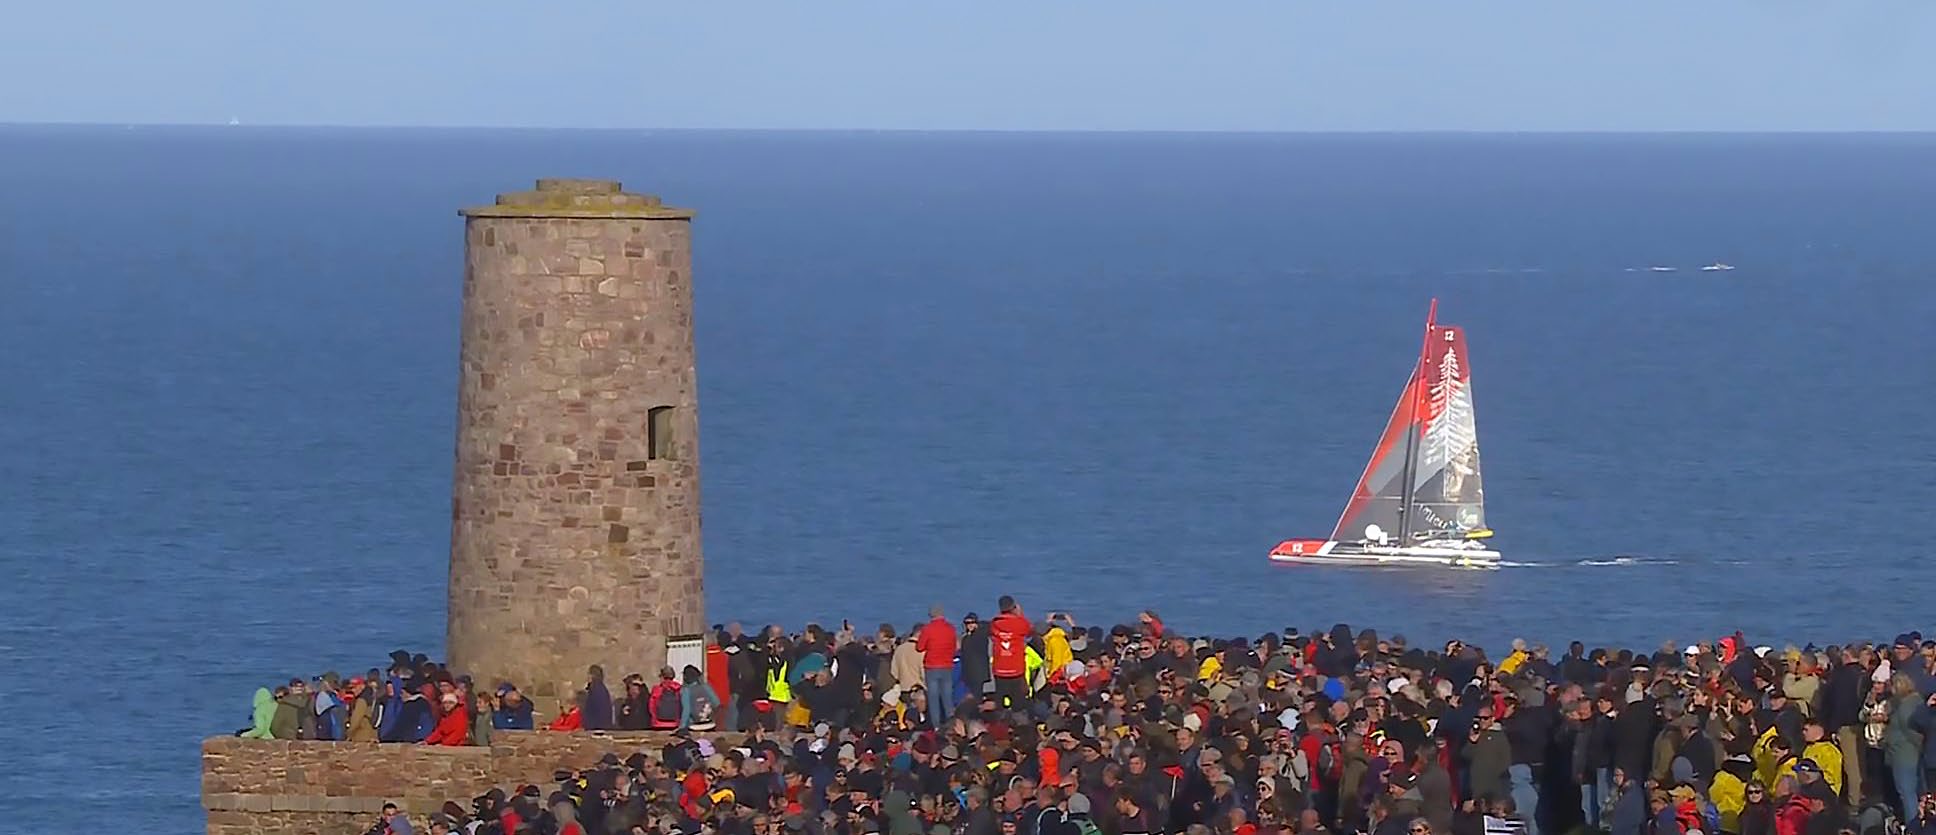 on-x joins the Route du Rhum with Mieux